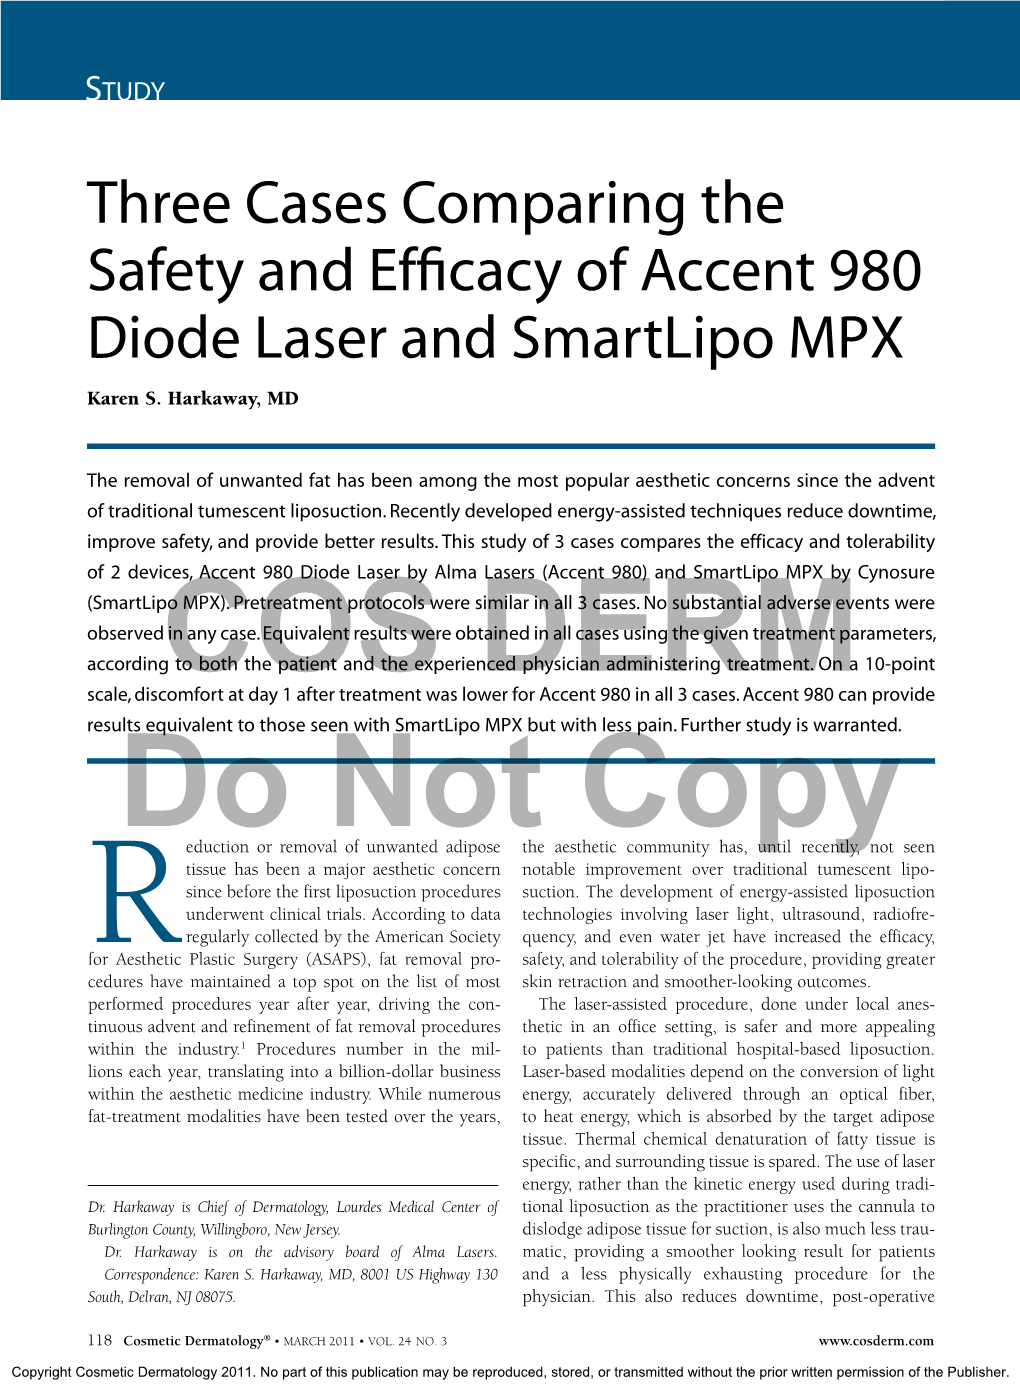 Three Cases Comparing the Safety and Efficacy of Accent 980 Diode Laser and Smartlipo MPX Karen S